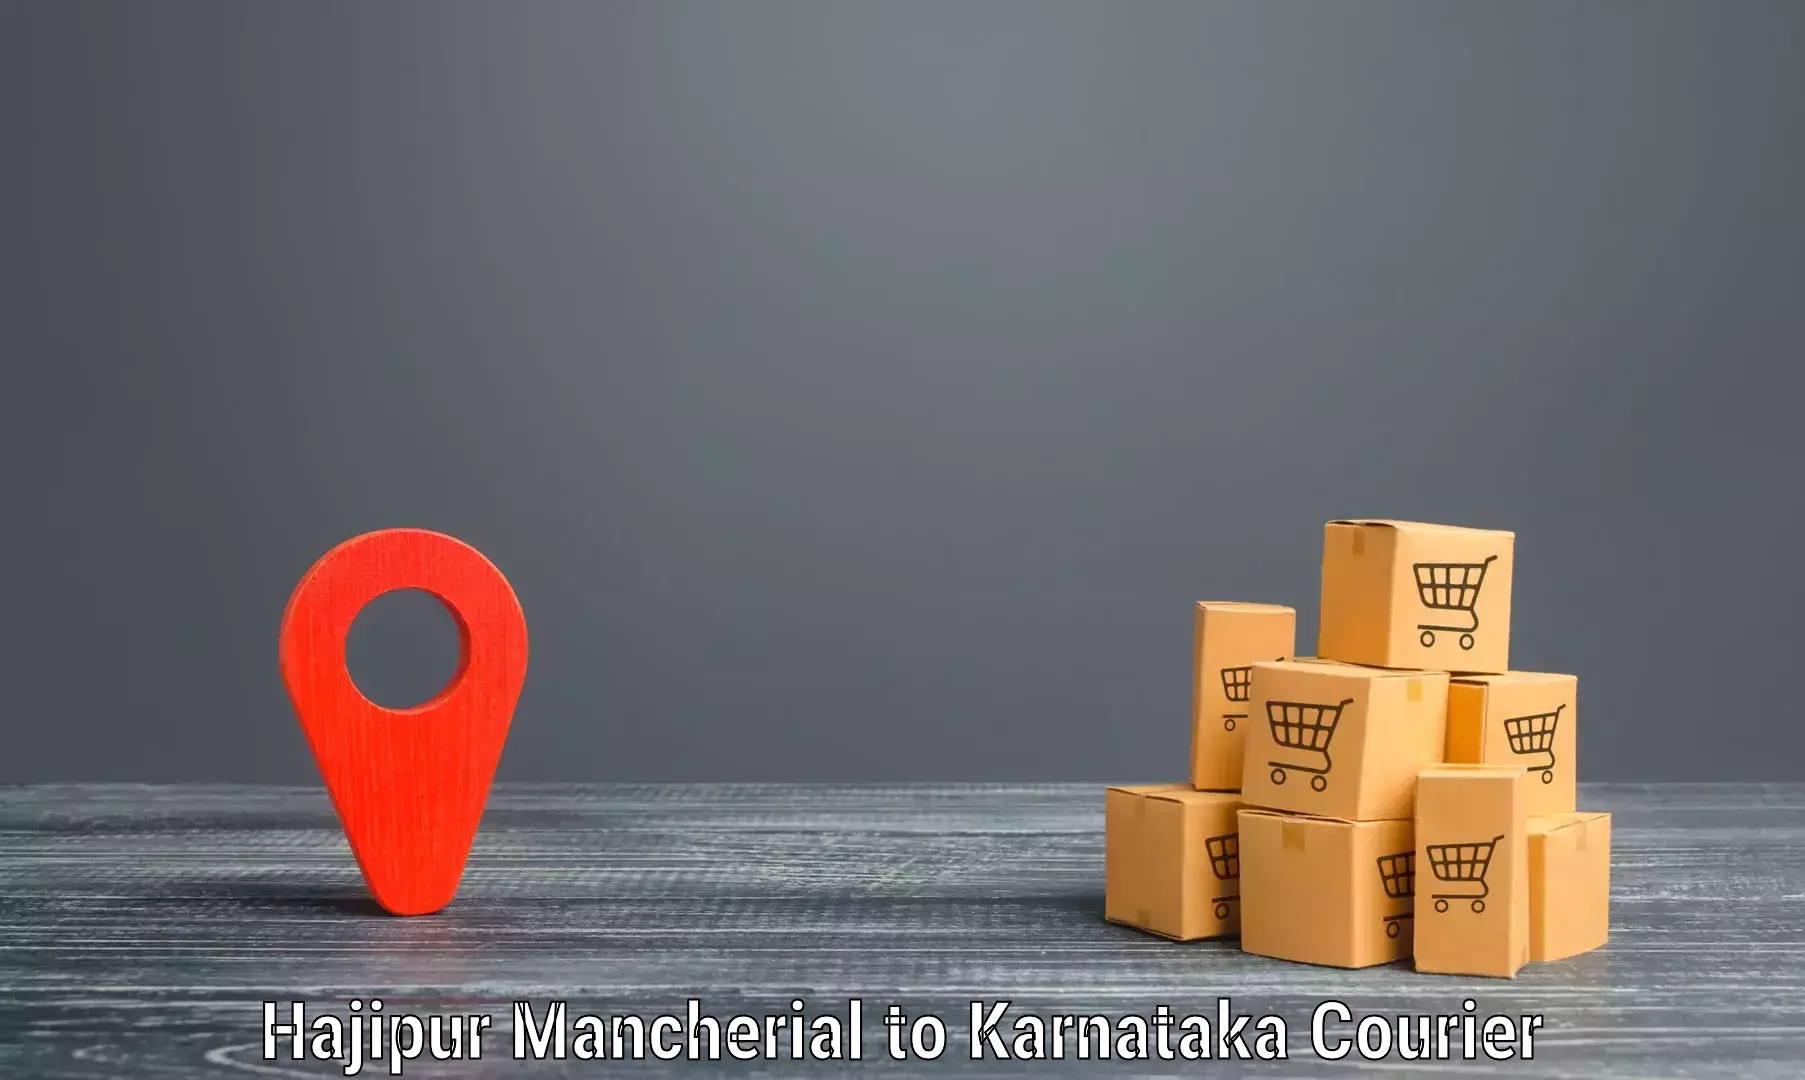 Air courier services in Hajipur Mancherial to Tikota